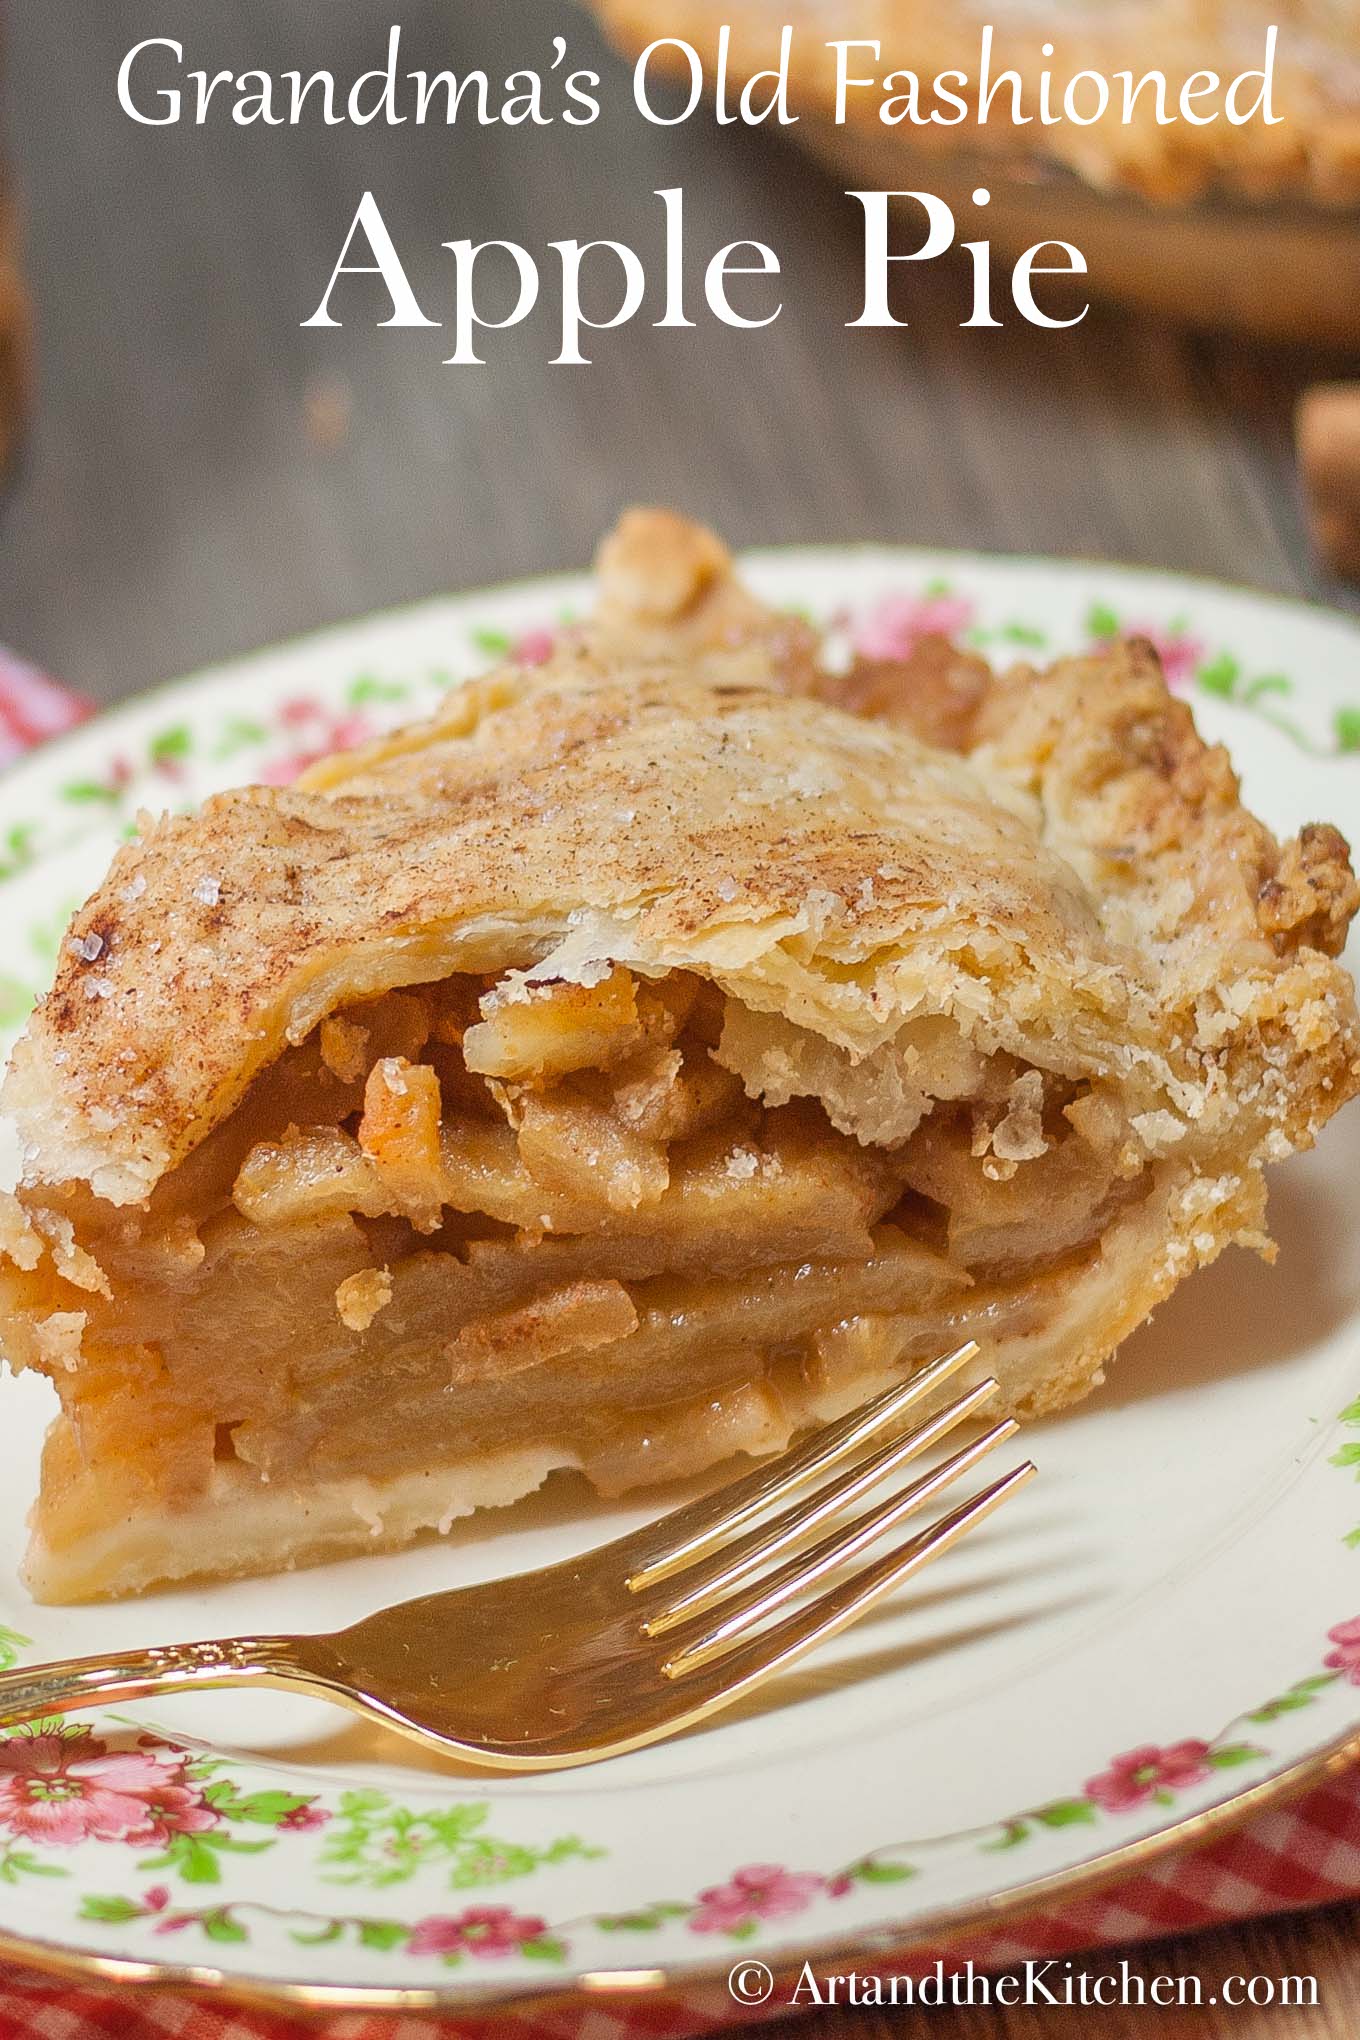 Grandma's Old Fashioned Apple Pie recipe starts with an ultra flaky made from scratch pie crust, then filled with fresh apples in sweet cinnamon filling. The best apple pie you will ever eat! via @artandthekitch